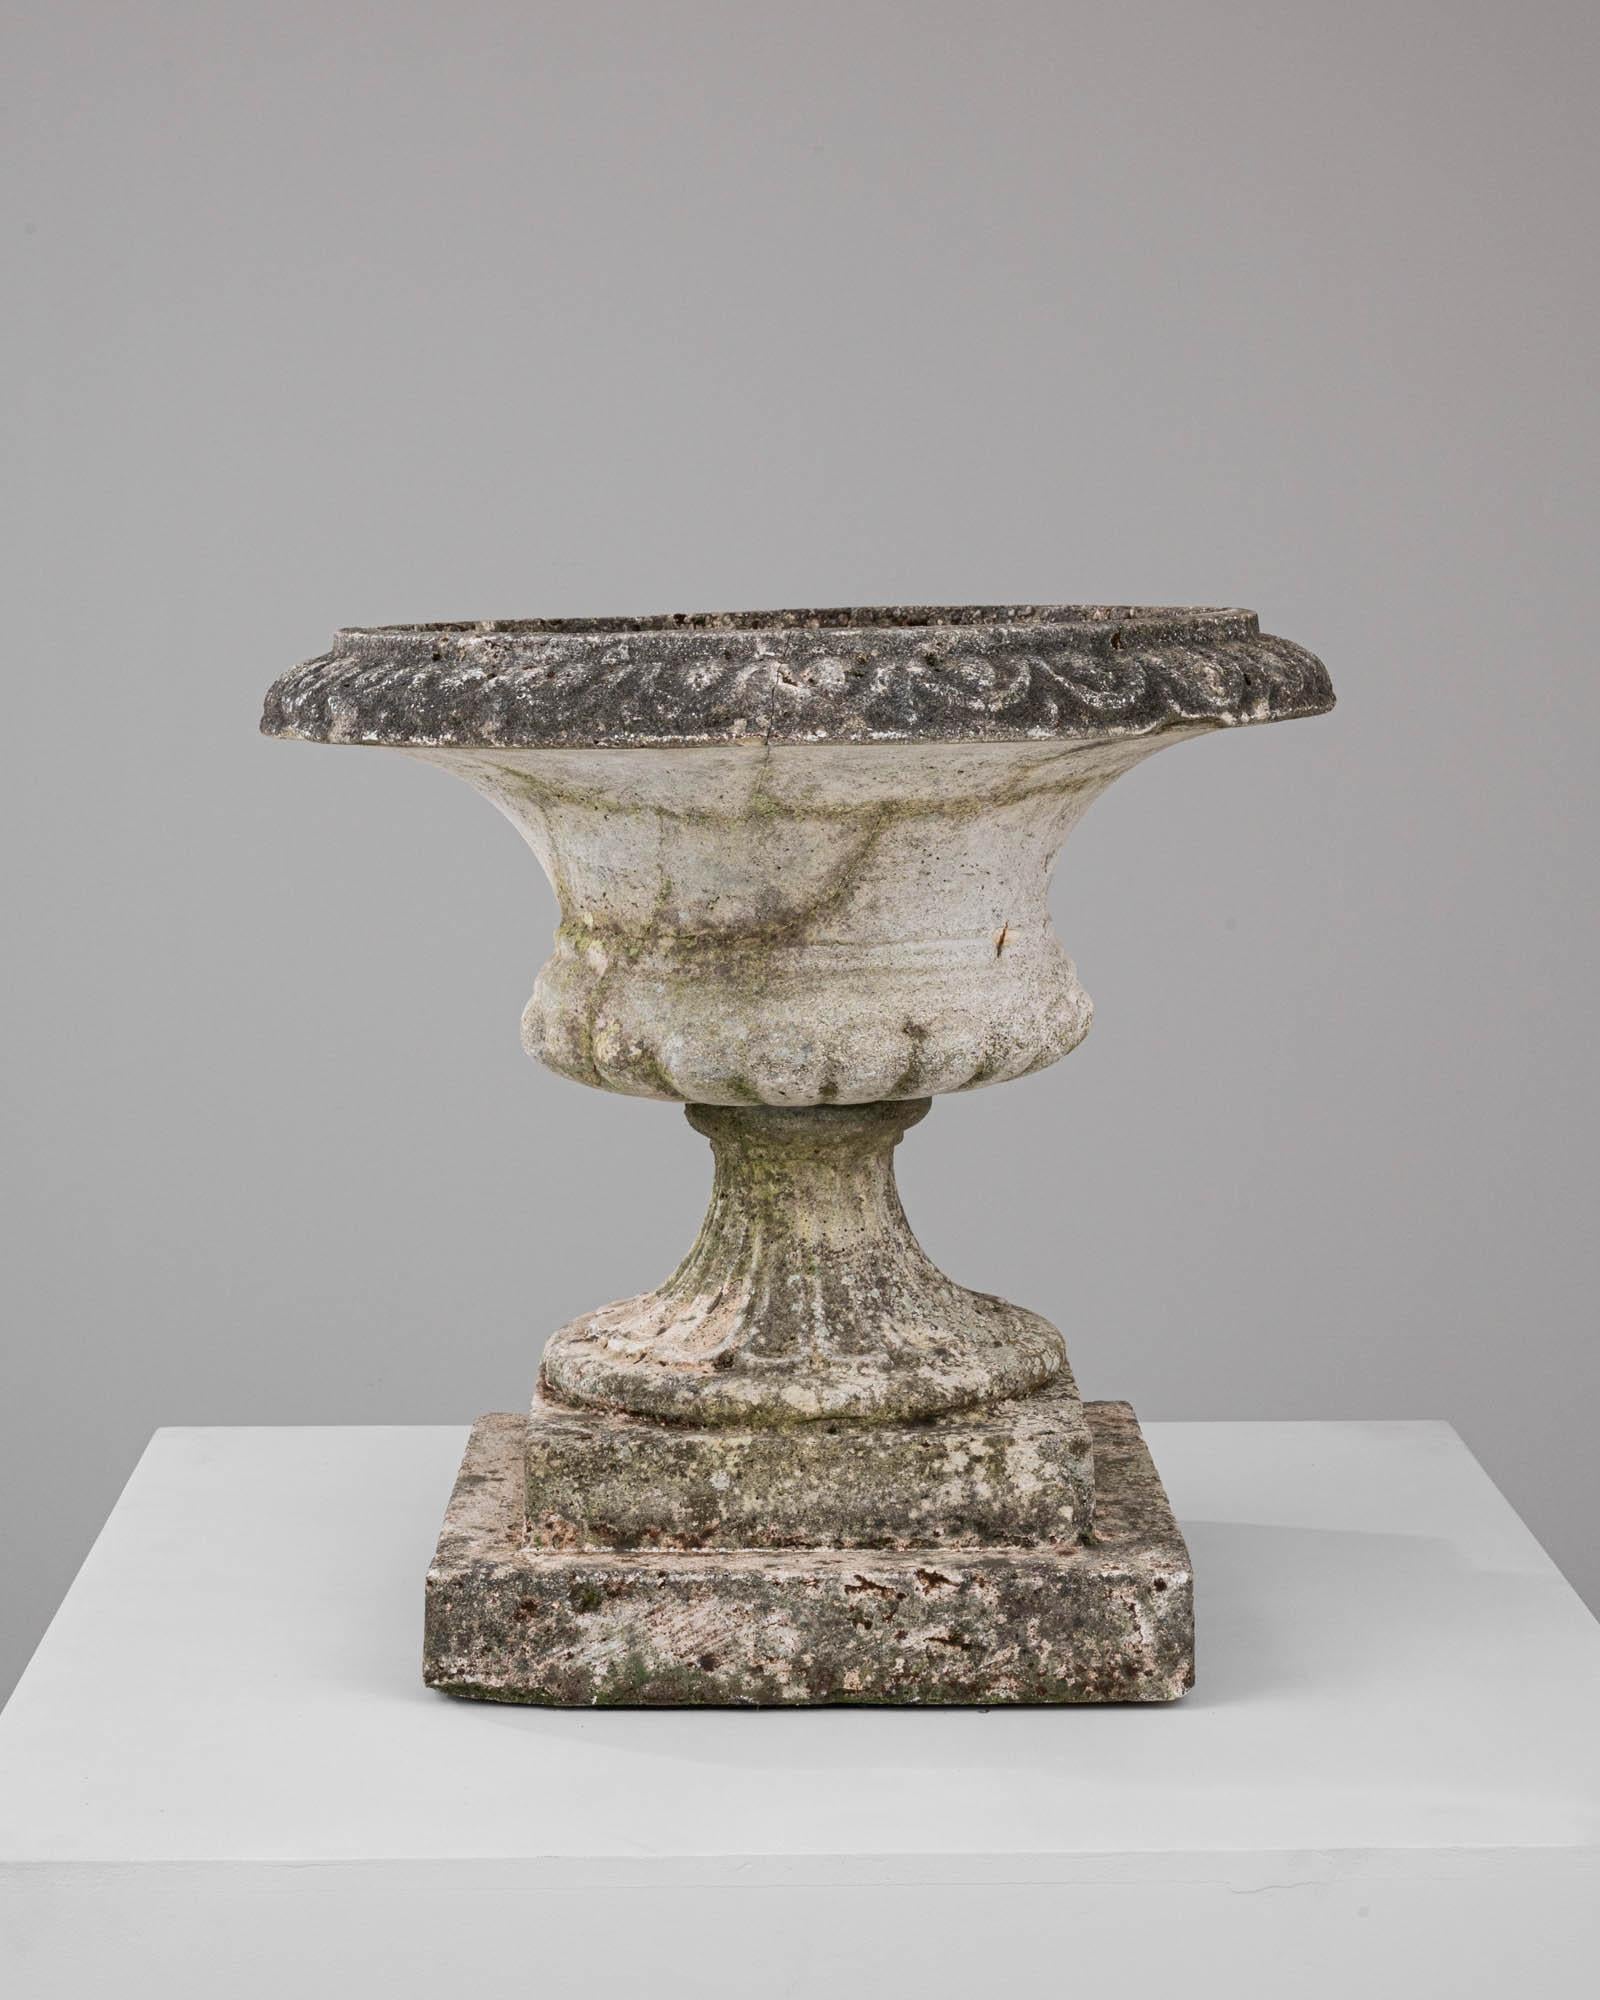 This 20th-century French concrete planter stands as a sculptural tribute to the art of classic garden design. Its wide, welcoming brim and stout base are characteristic of traditional European elegance, lending a stately presence to any setting. The